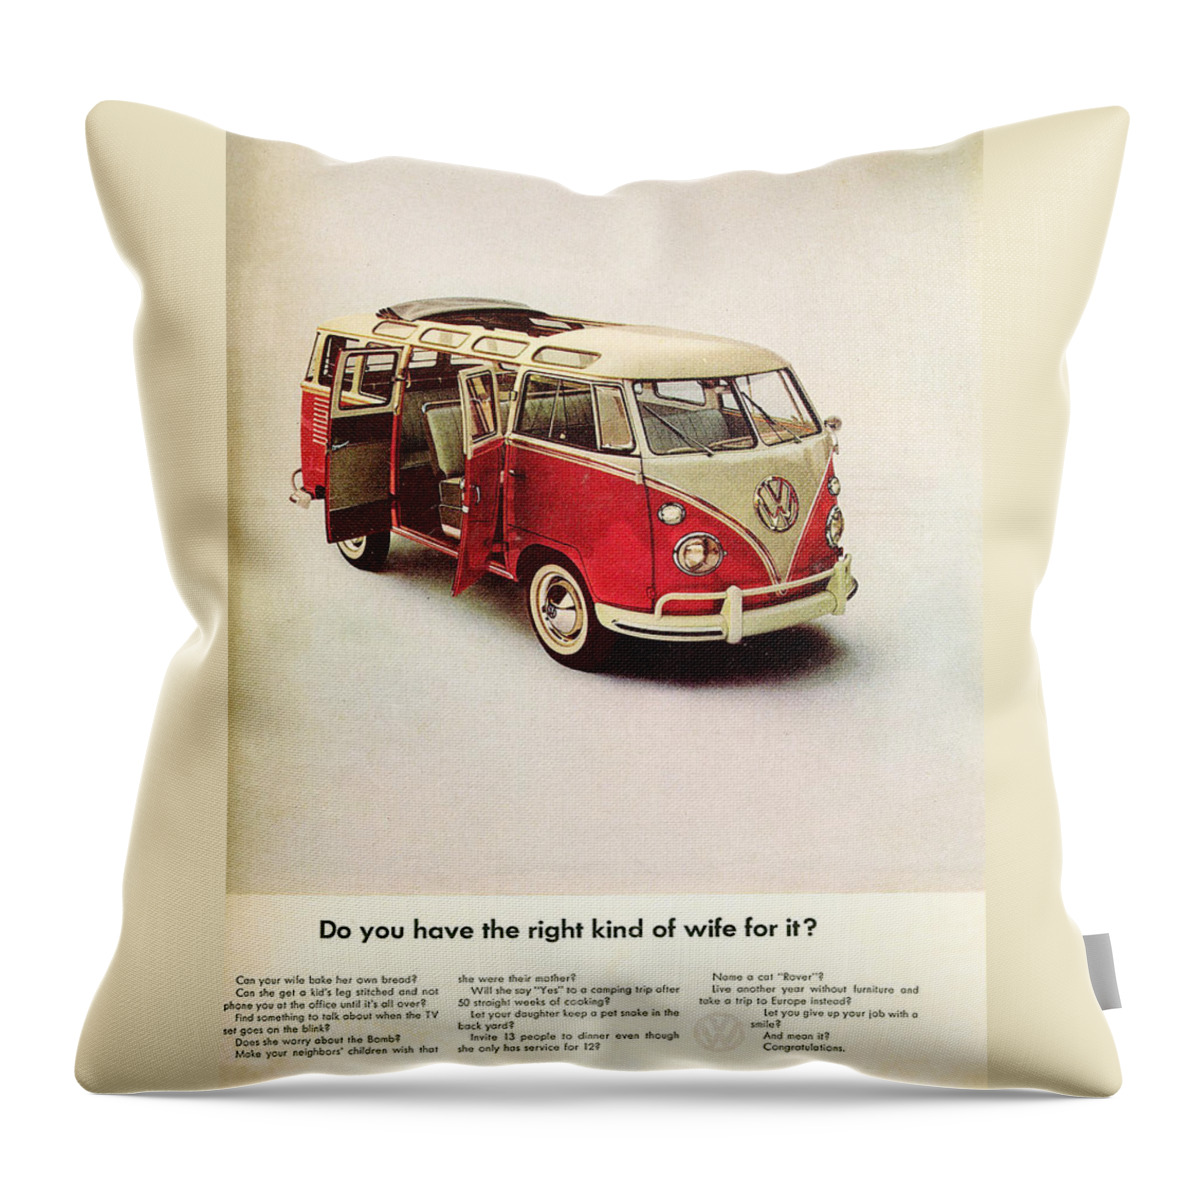 Volkswagen Van Throw Pillow featuring the digital art Do you have the right kind of wife for it by Georgia Fowler